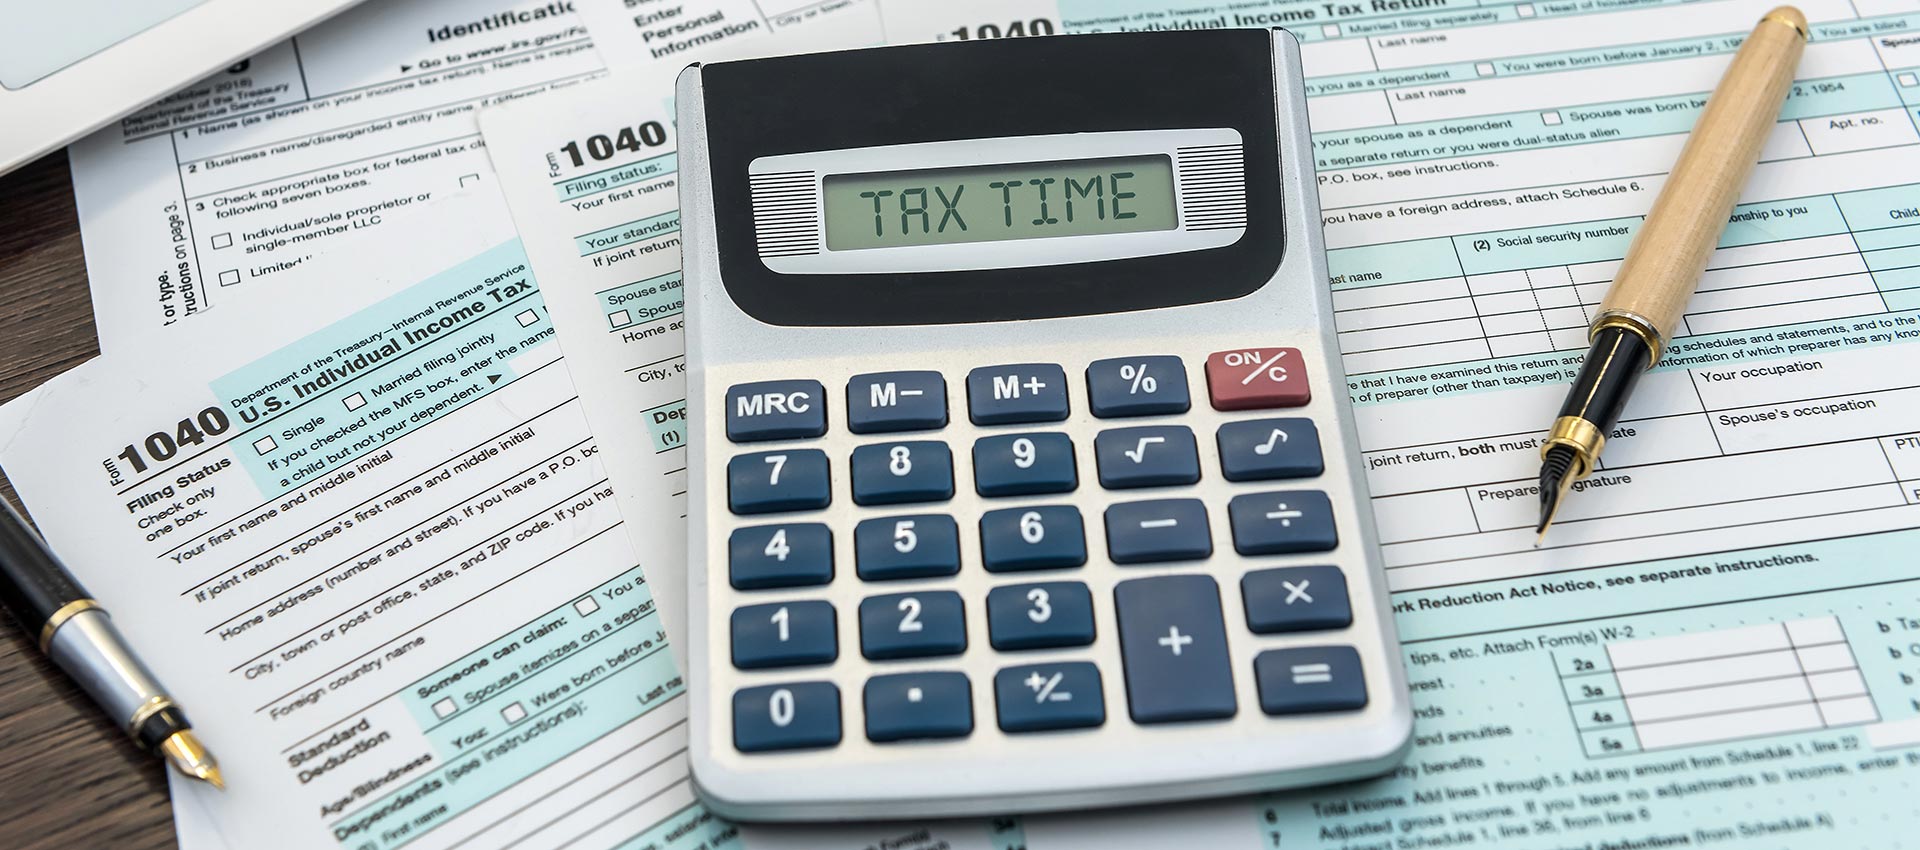 Tax Return - Accounting Services